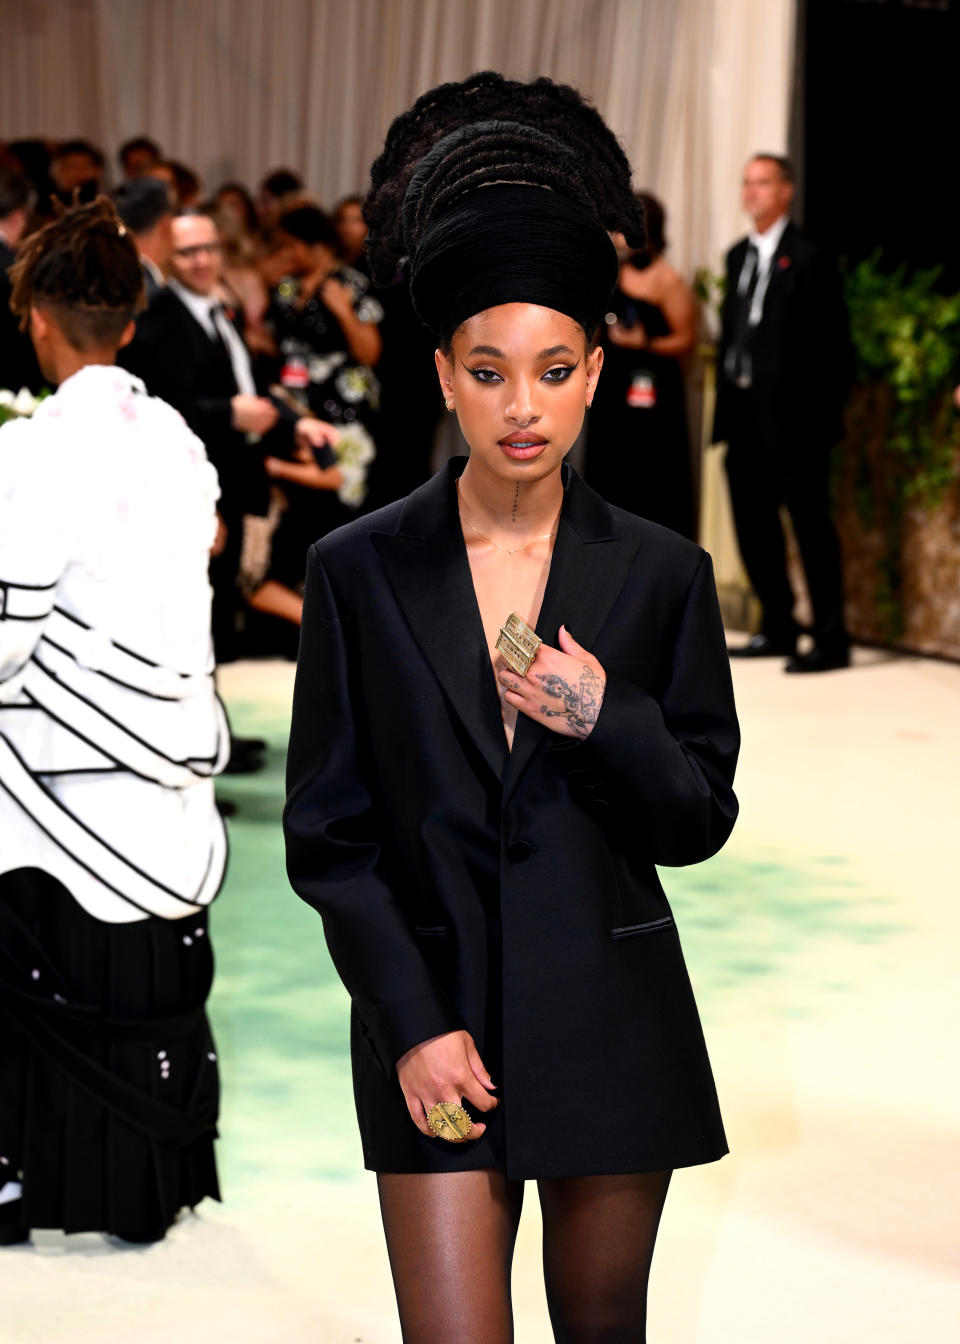 Willow Smith wearing a black oversized blazer and statement ring on the red carpet at a celebrity event, with attendees in the background